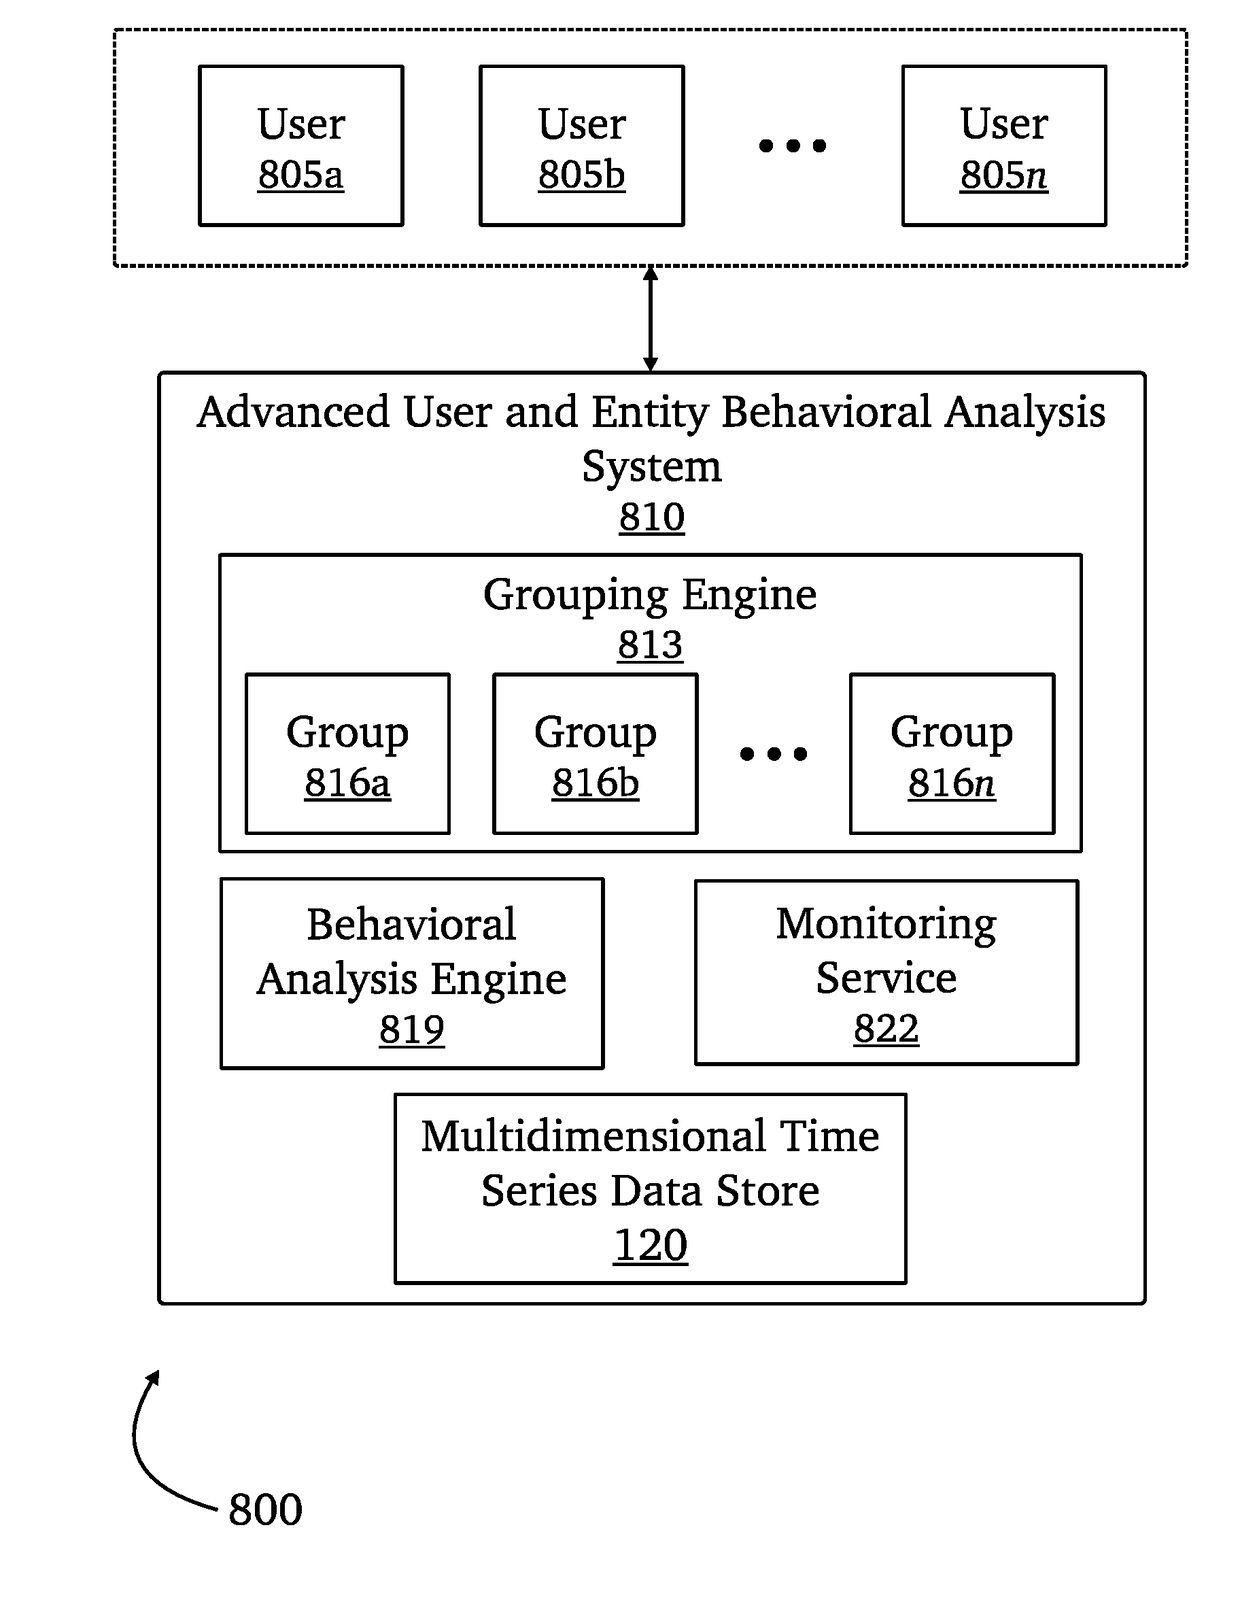 User and entity behavioral analysis using an advanced cyber decision platform